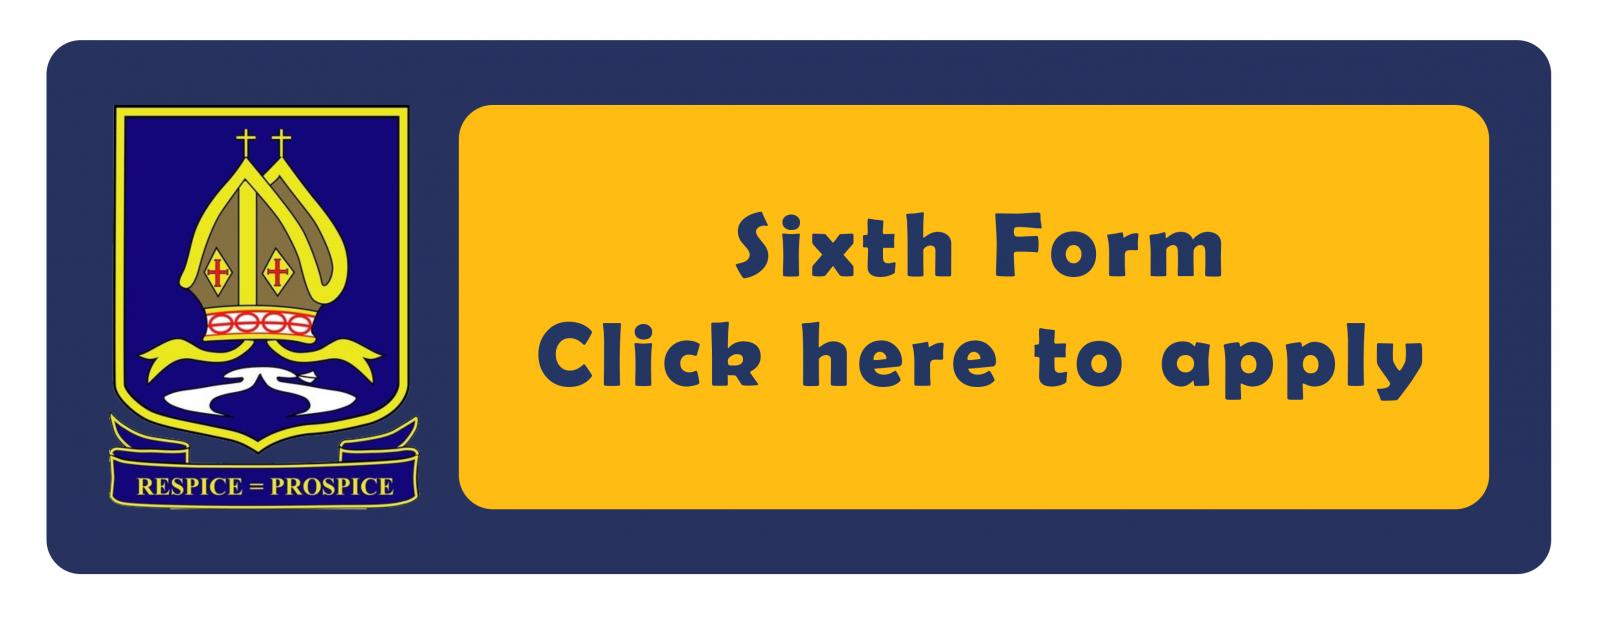 sixth form click here to apply button